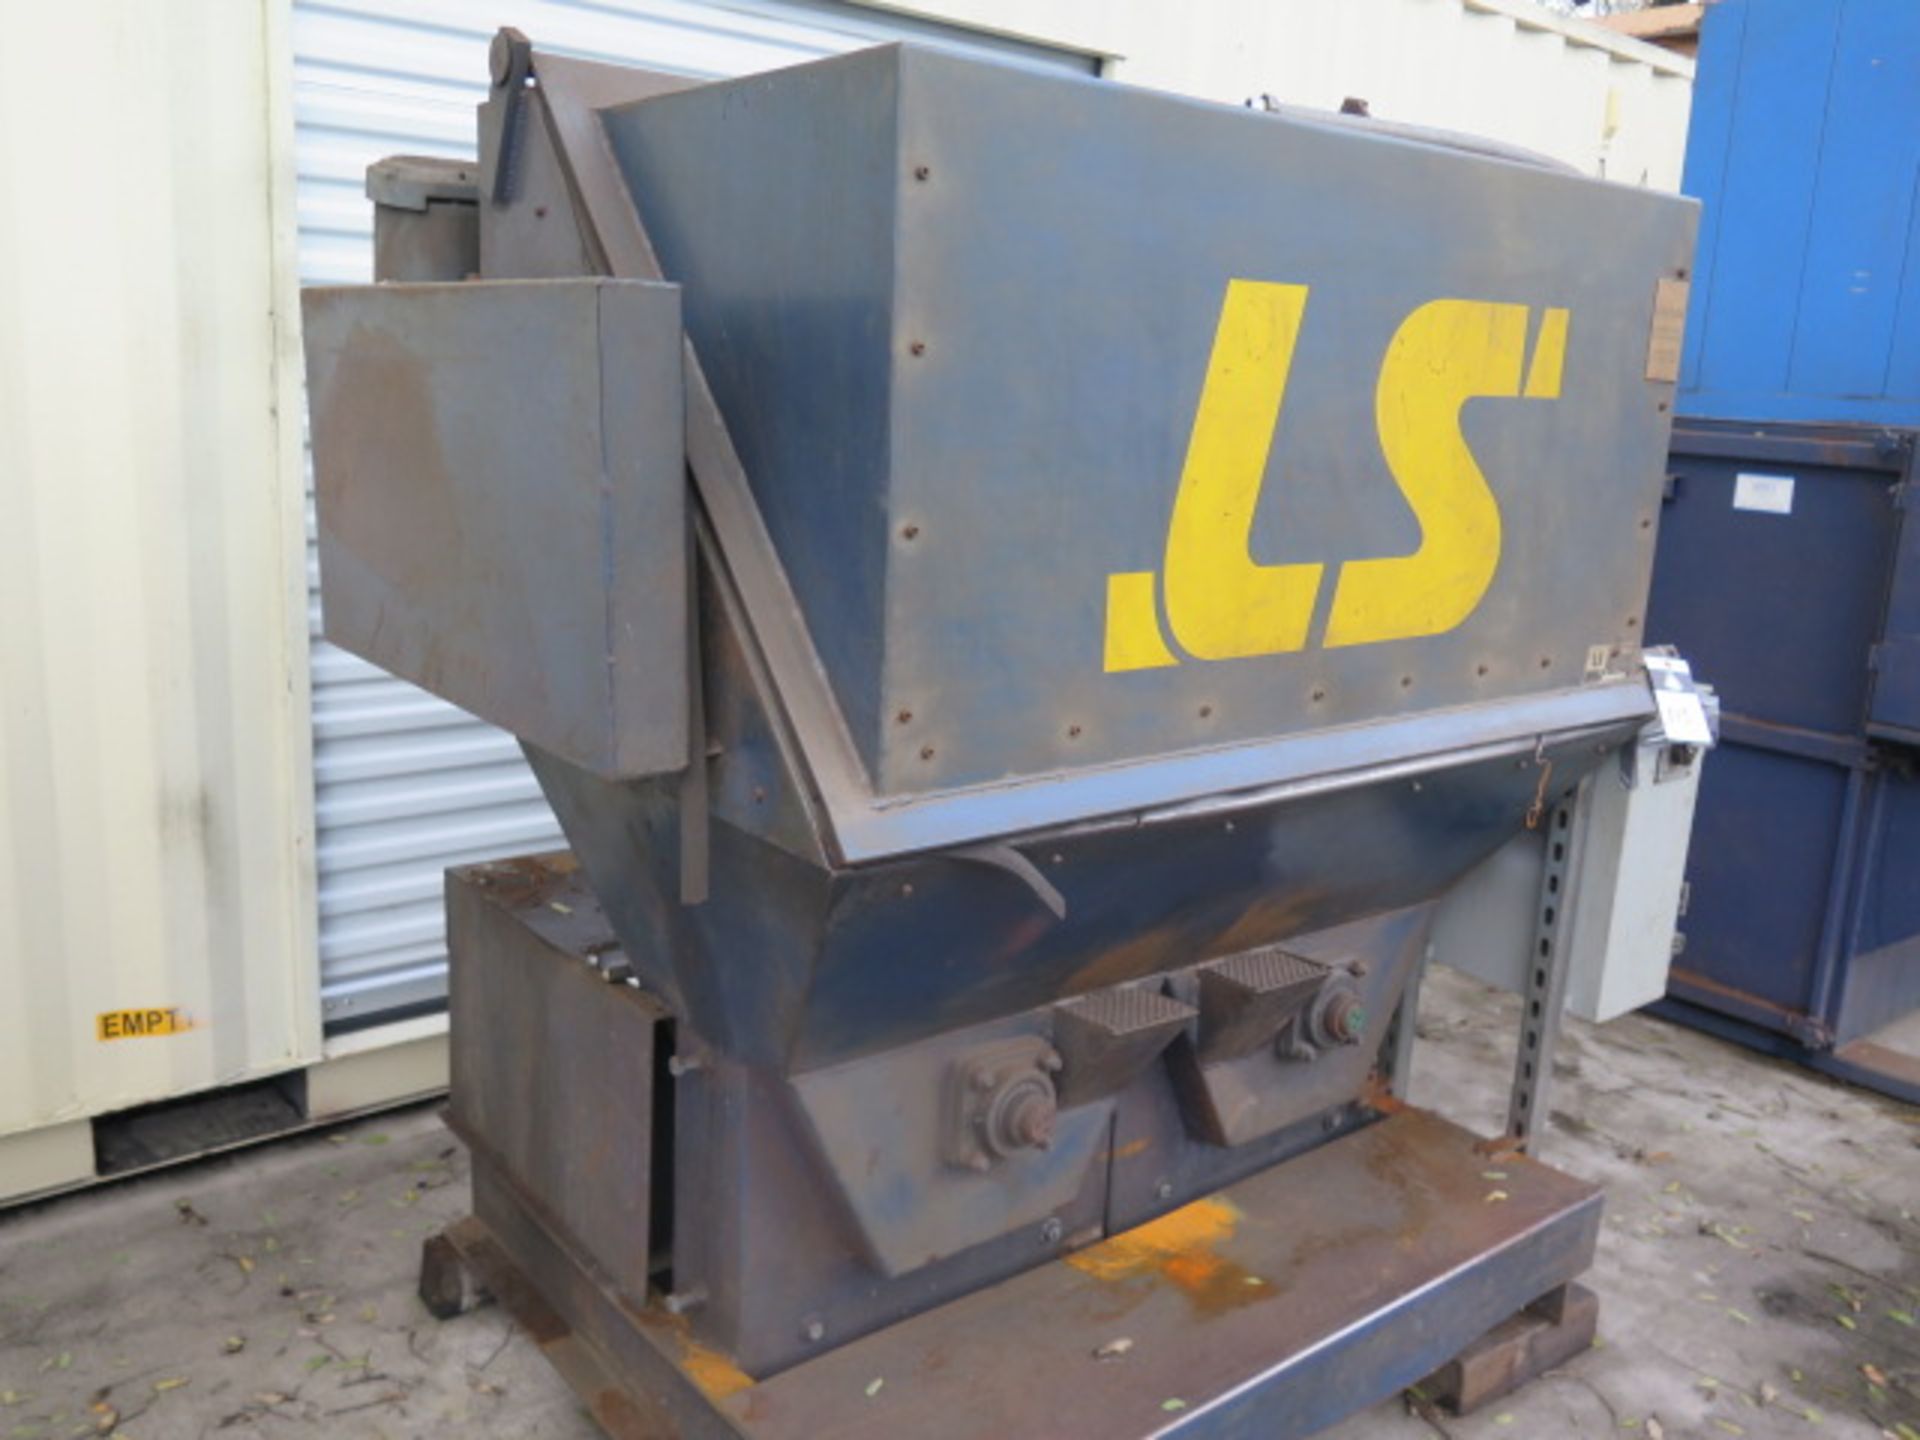 LS Wheel-Abrator Peen Blasting System w/ Dust Collector (SOLD AS-IS - NO WARRANTY) - Image 3 of 16